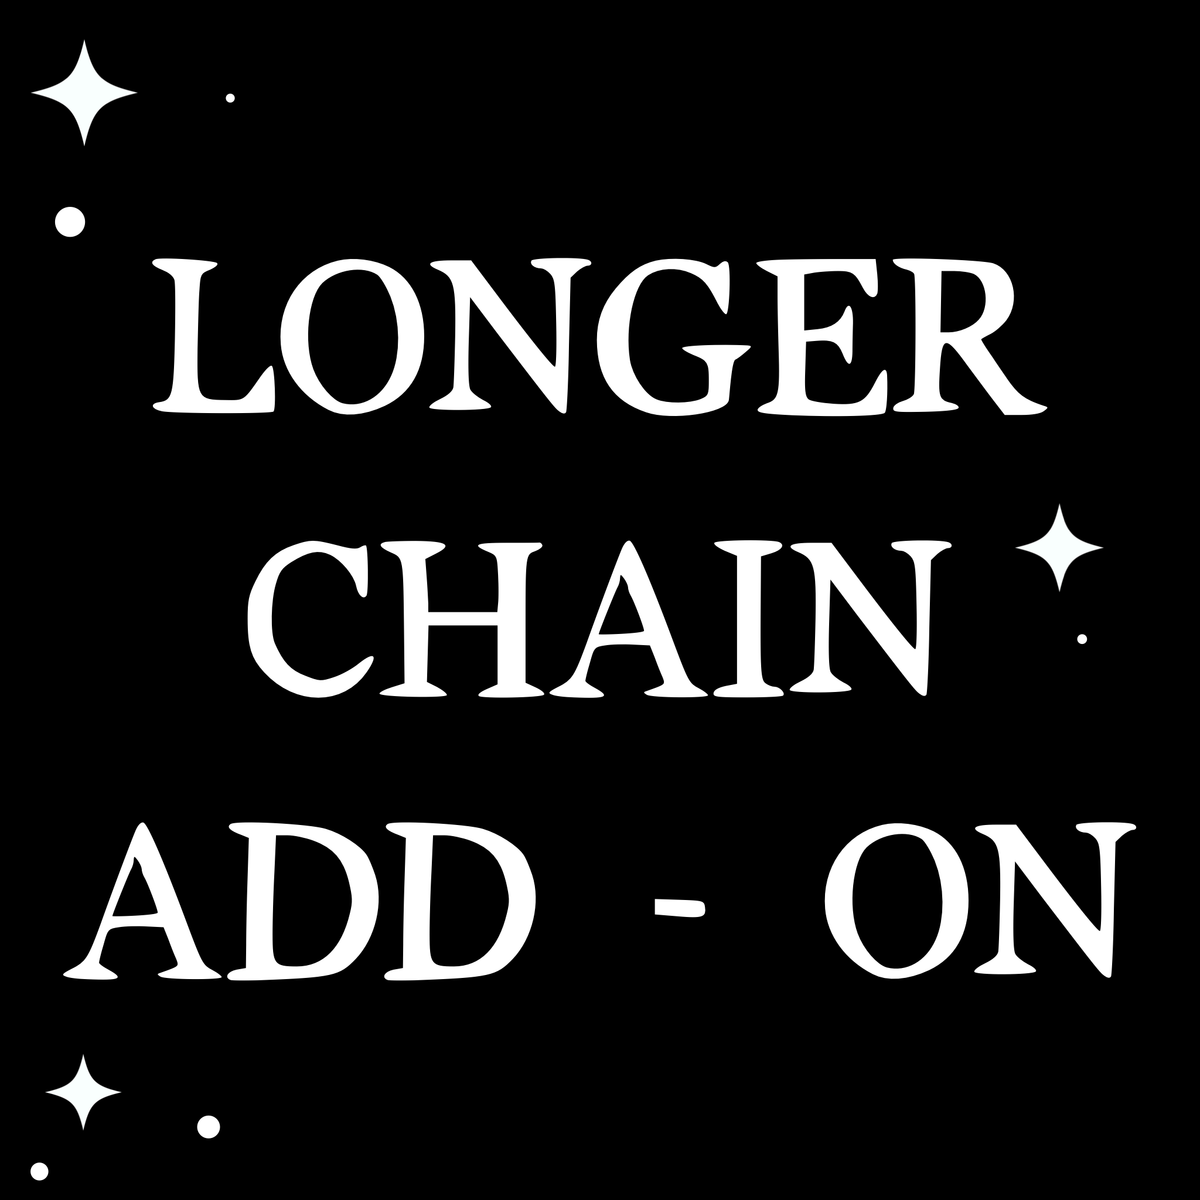 FOR CHAIN LENGTHS 22” to 30” - LONGER CHAIN ADD - ON